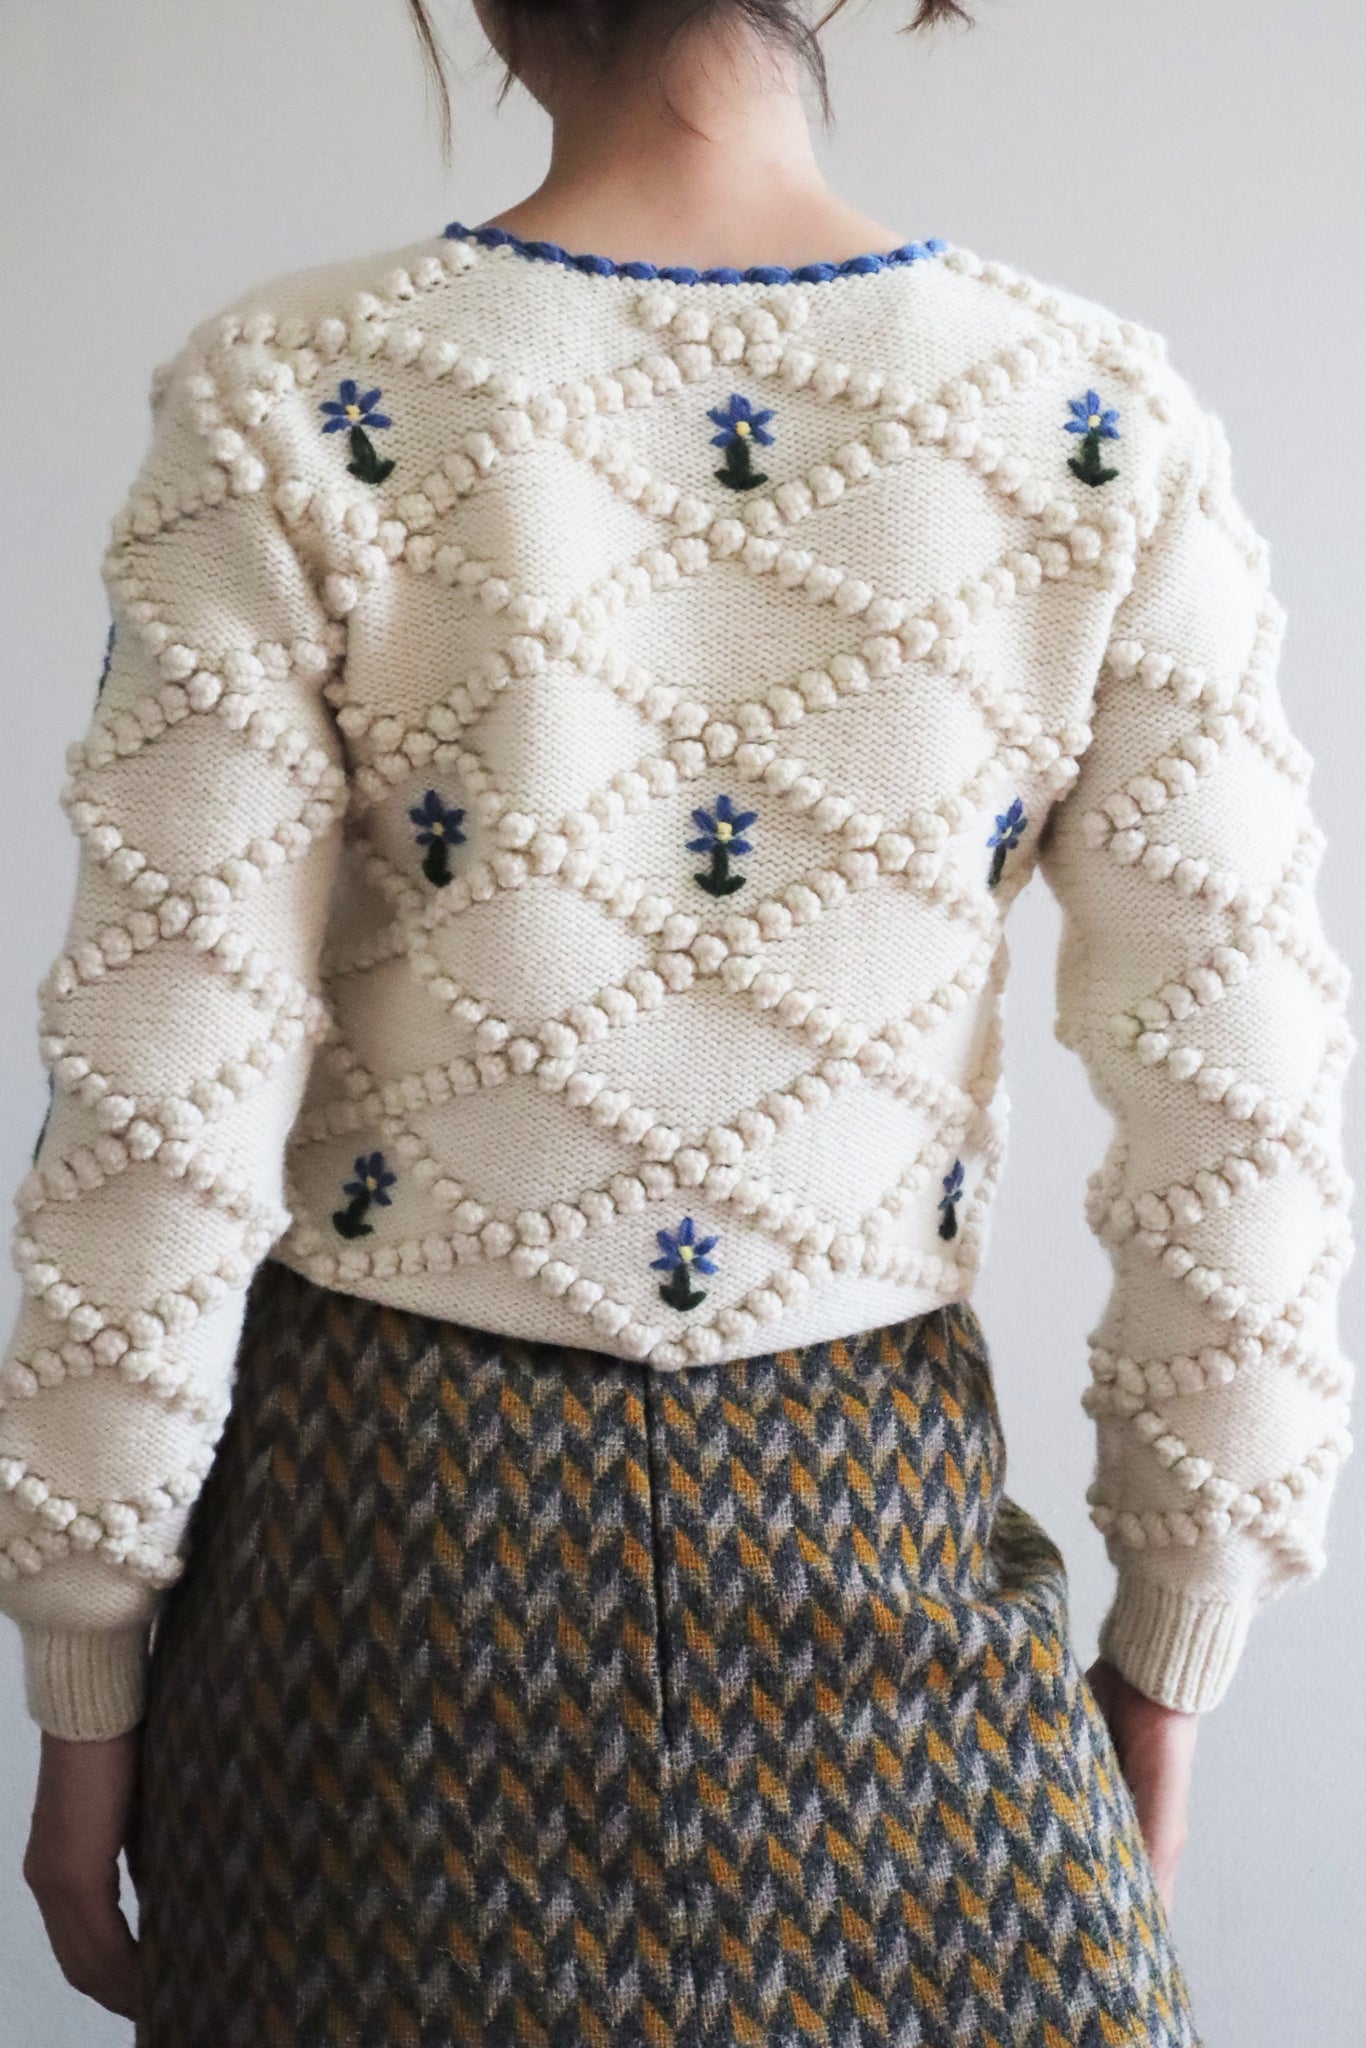 70s Embroidered Blue Flower Austrian Hand Knit Cardigan